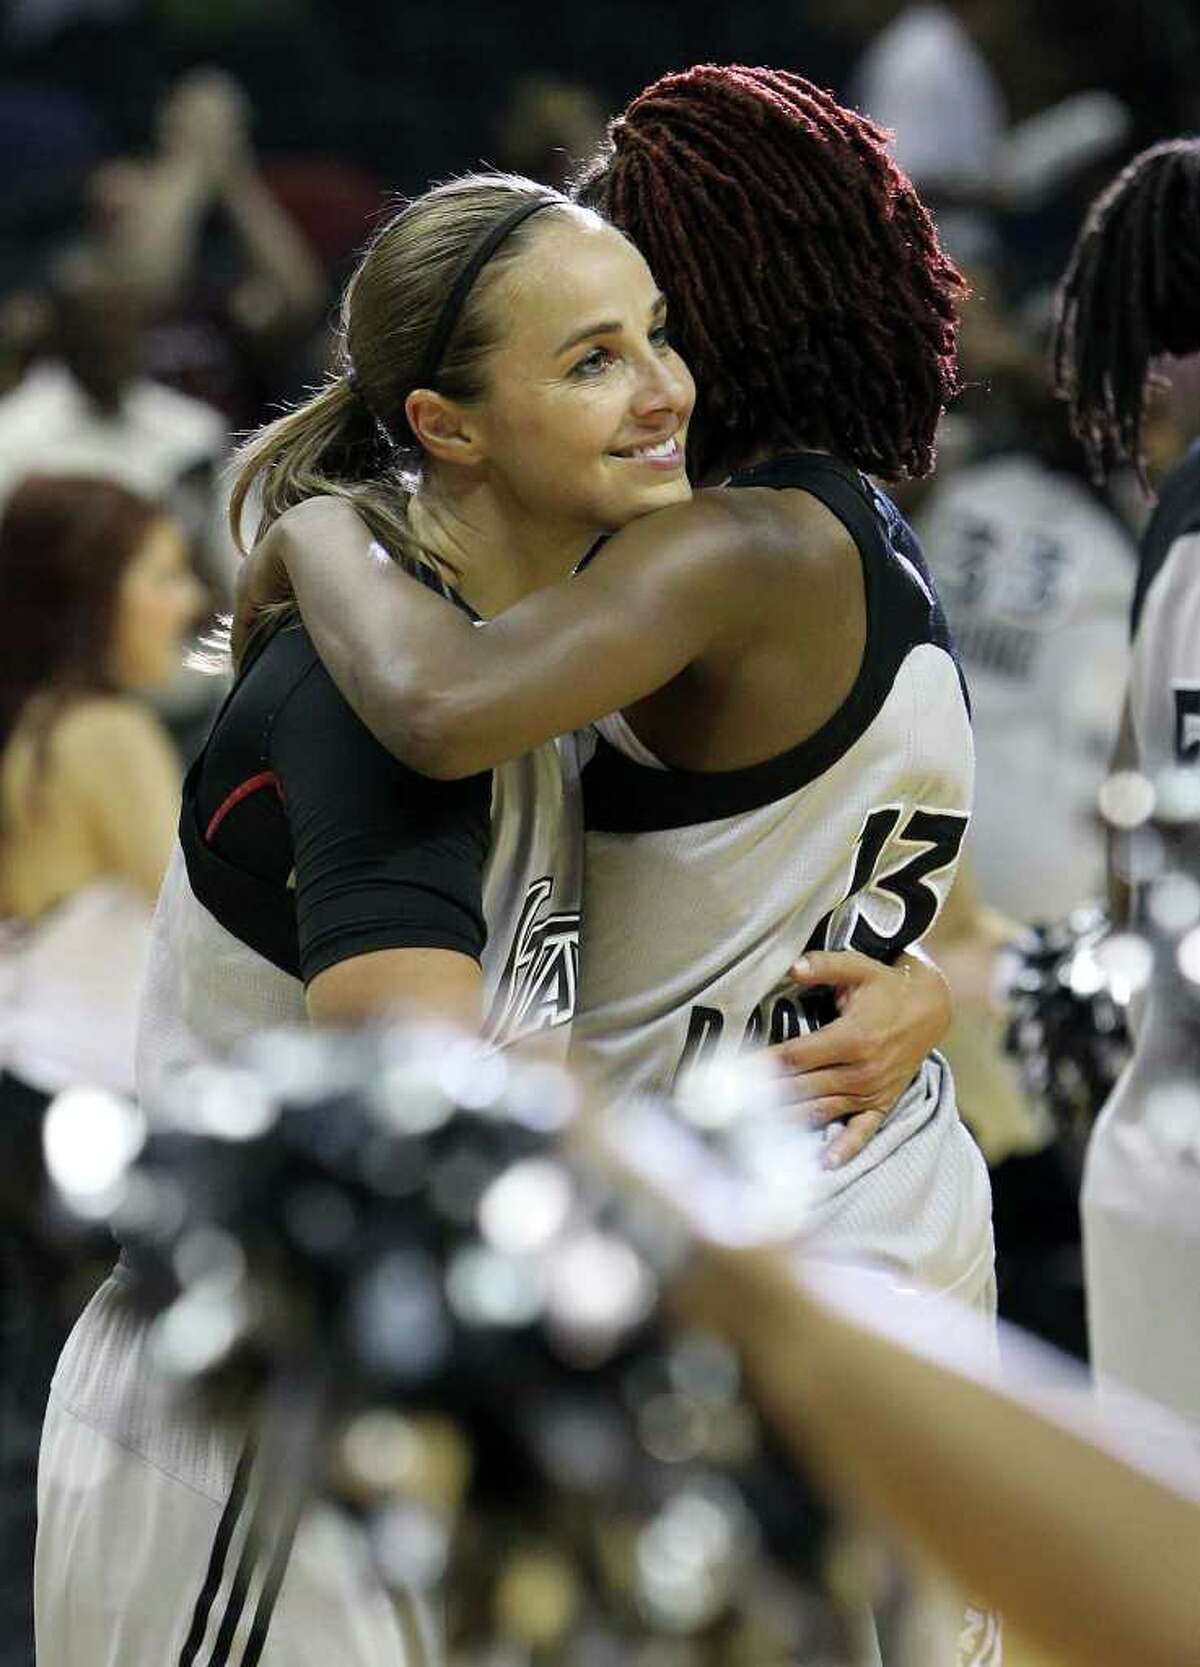 Silver Stars' Becky Hammon (25) gets a hug from teammate Danielle Robinson (13) after the Silver Stars defeated the Connecticut Sun, 78-66, at the AT&T Center on Tuesday, August 30, 2011. Hammon scored 16 points to surpass the 5,000 career point mark. Kin Man Hui/kmhui@express-news.net